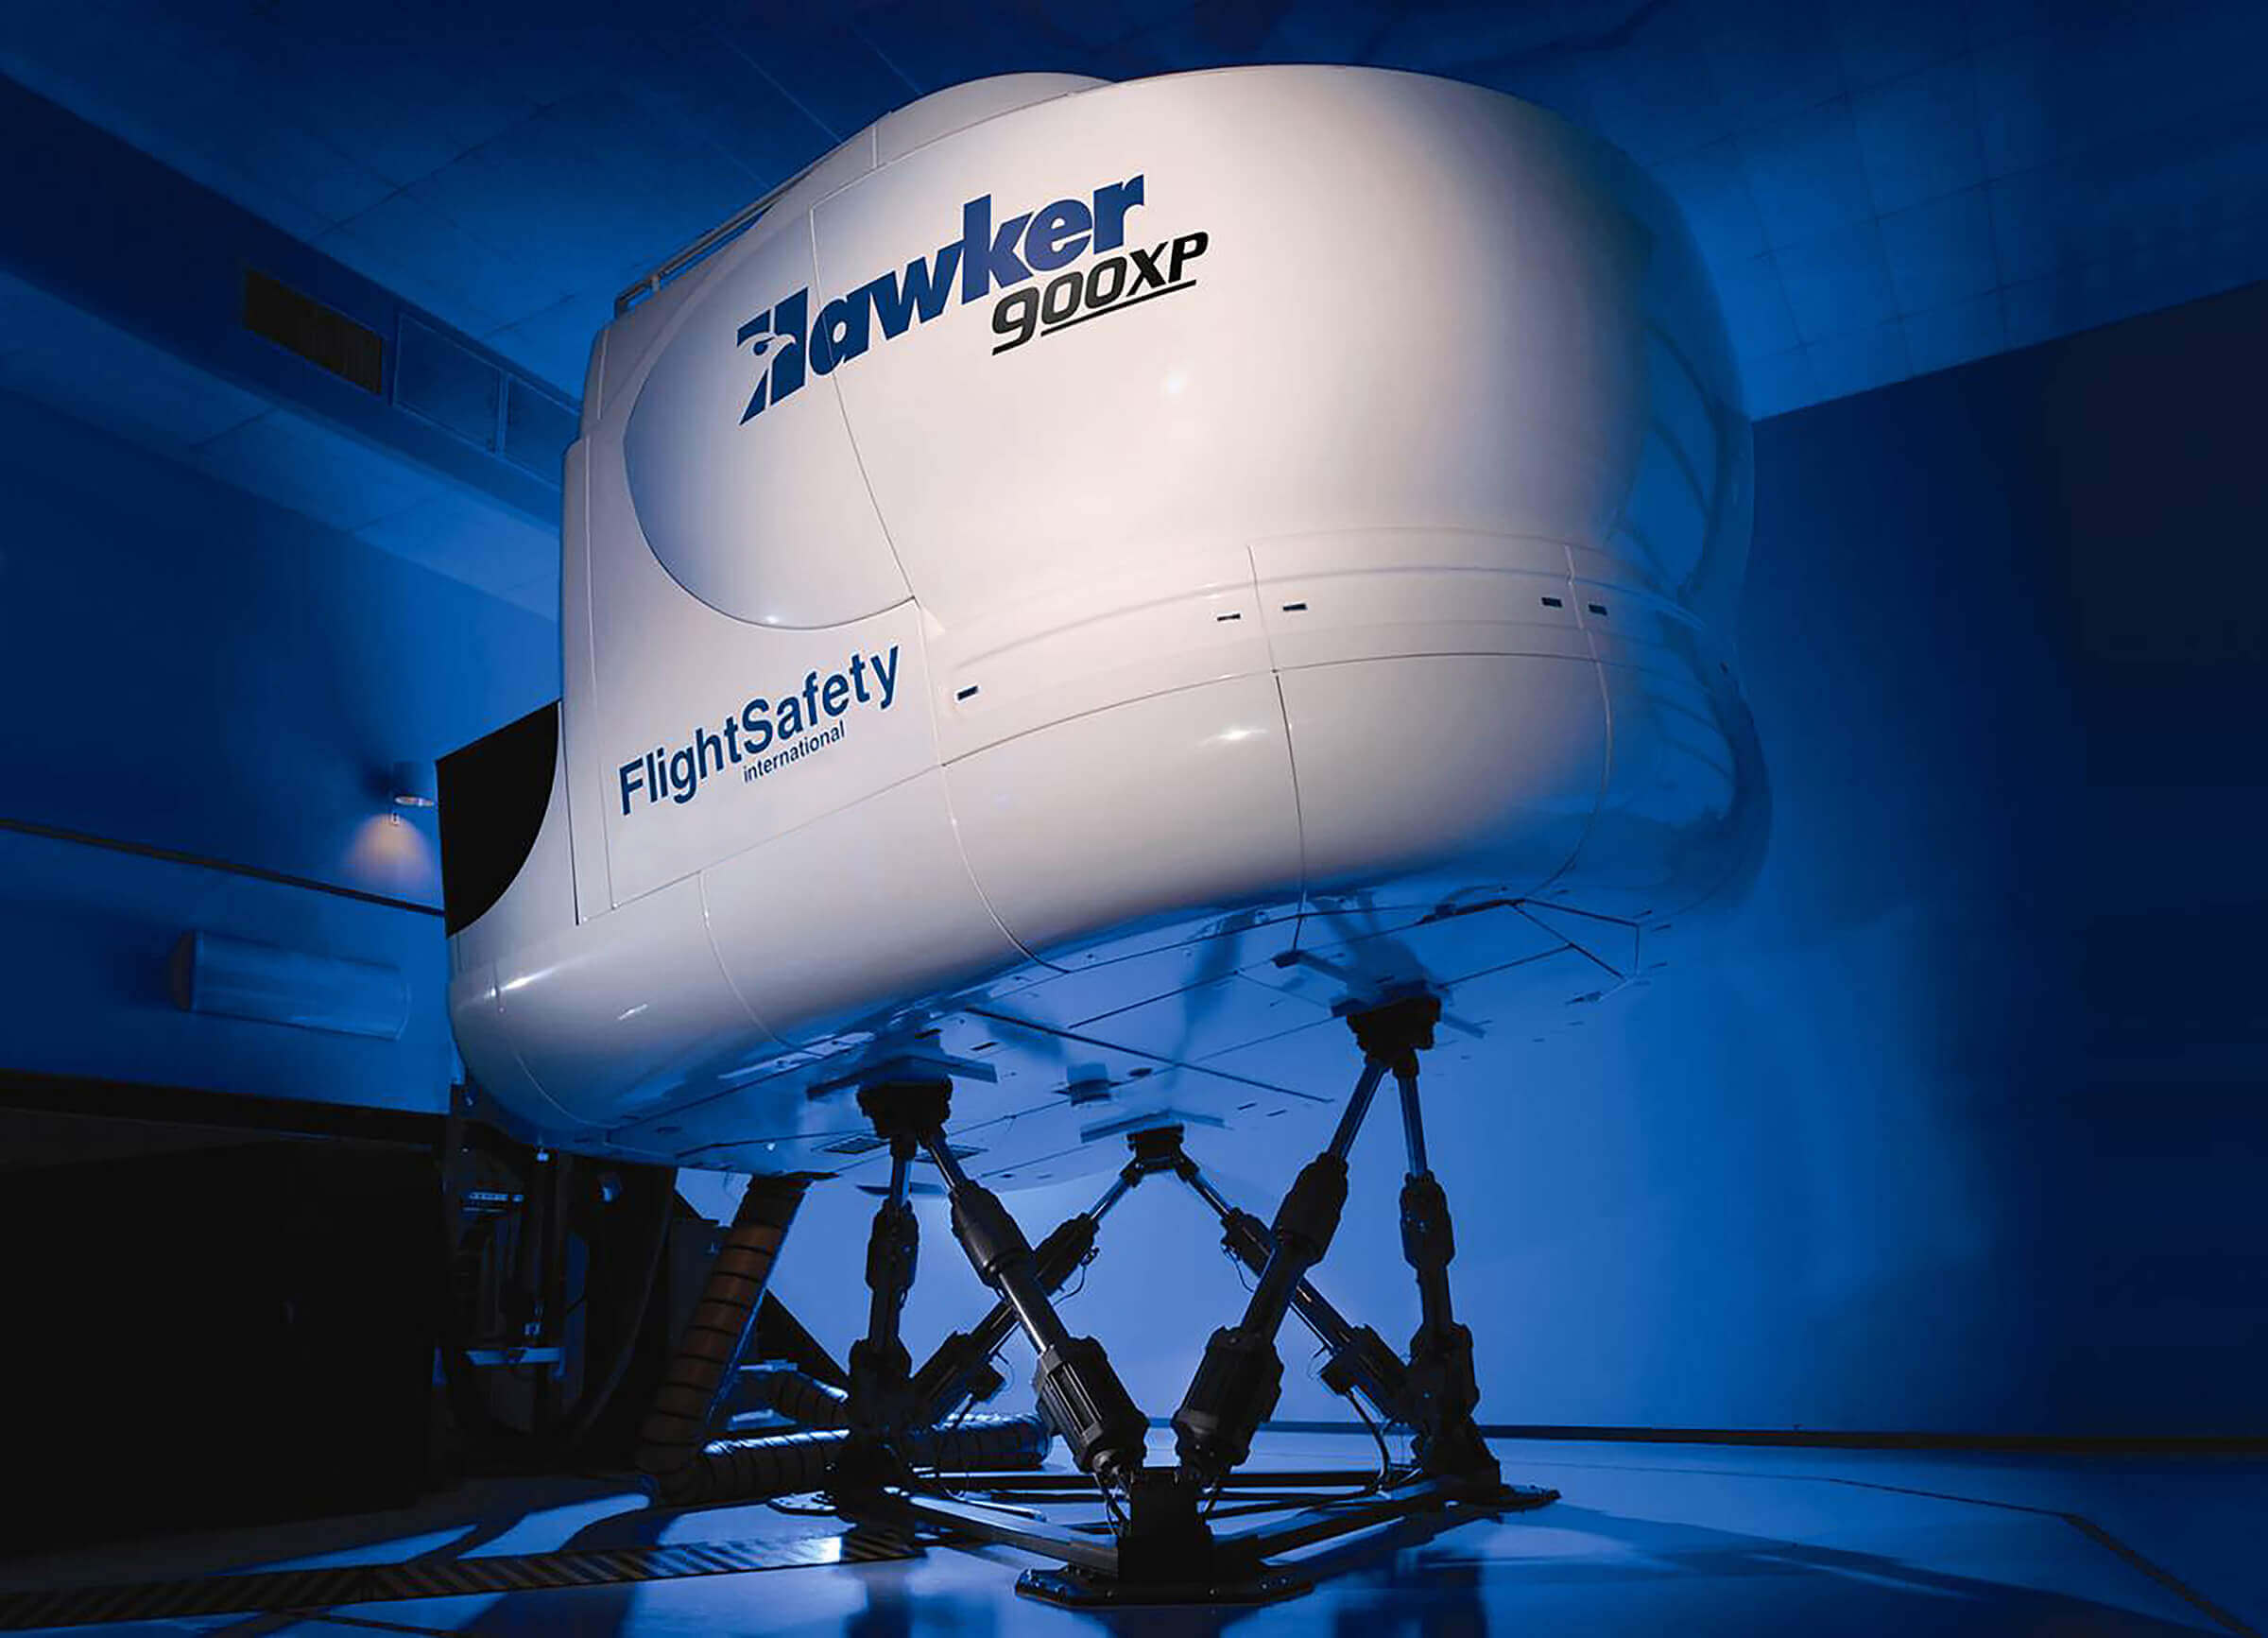 Purdue aviation adds full flight simulator to suite of training devices